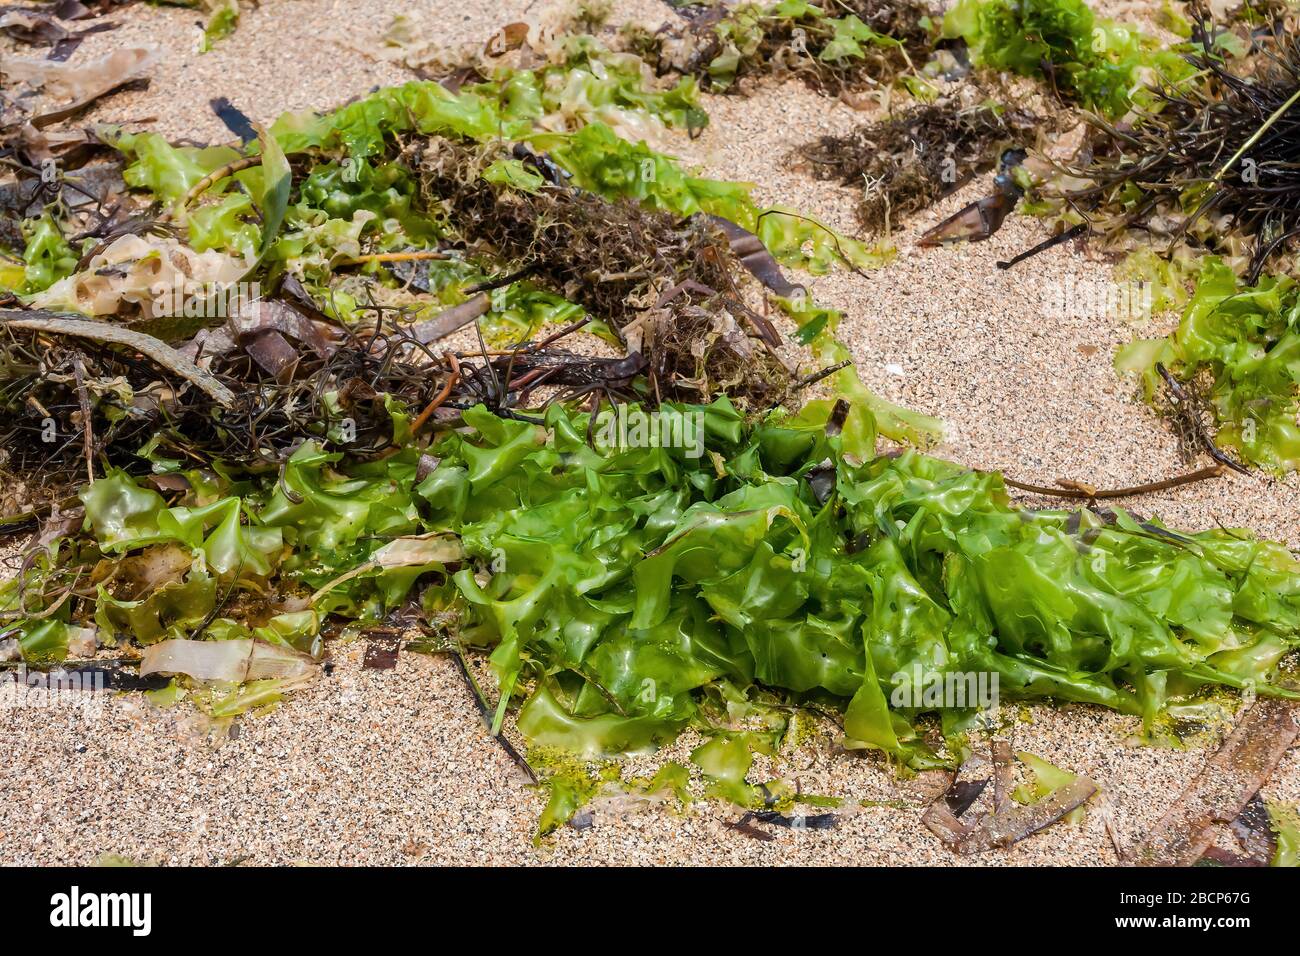 A close-up of beached seaweed on Bali Island Stock Photo